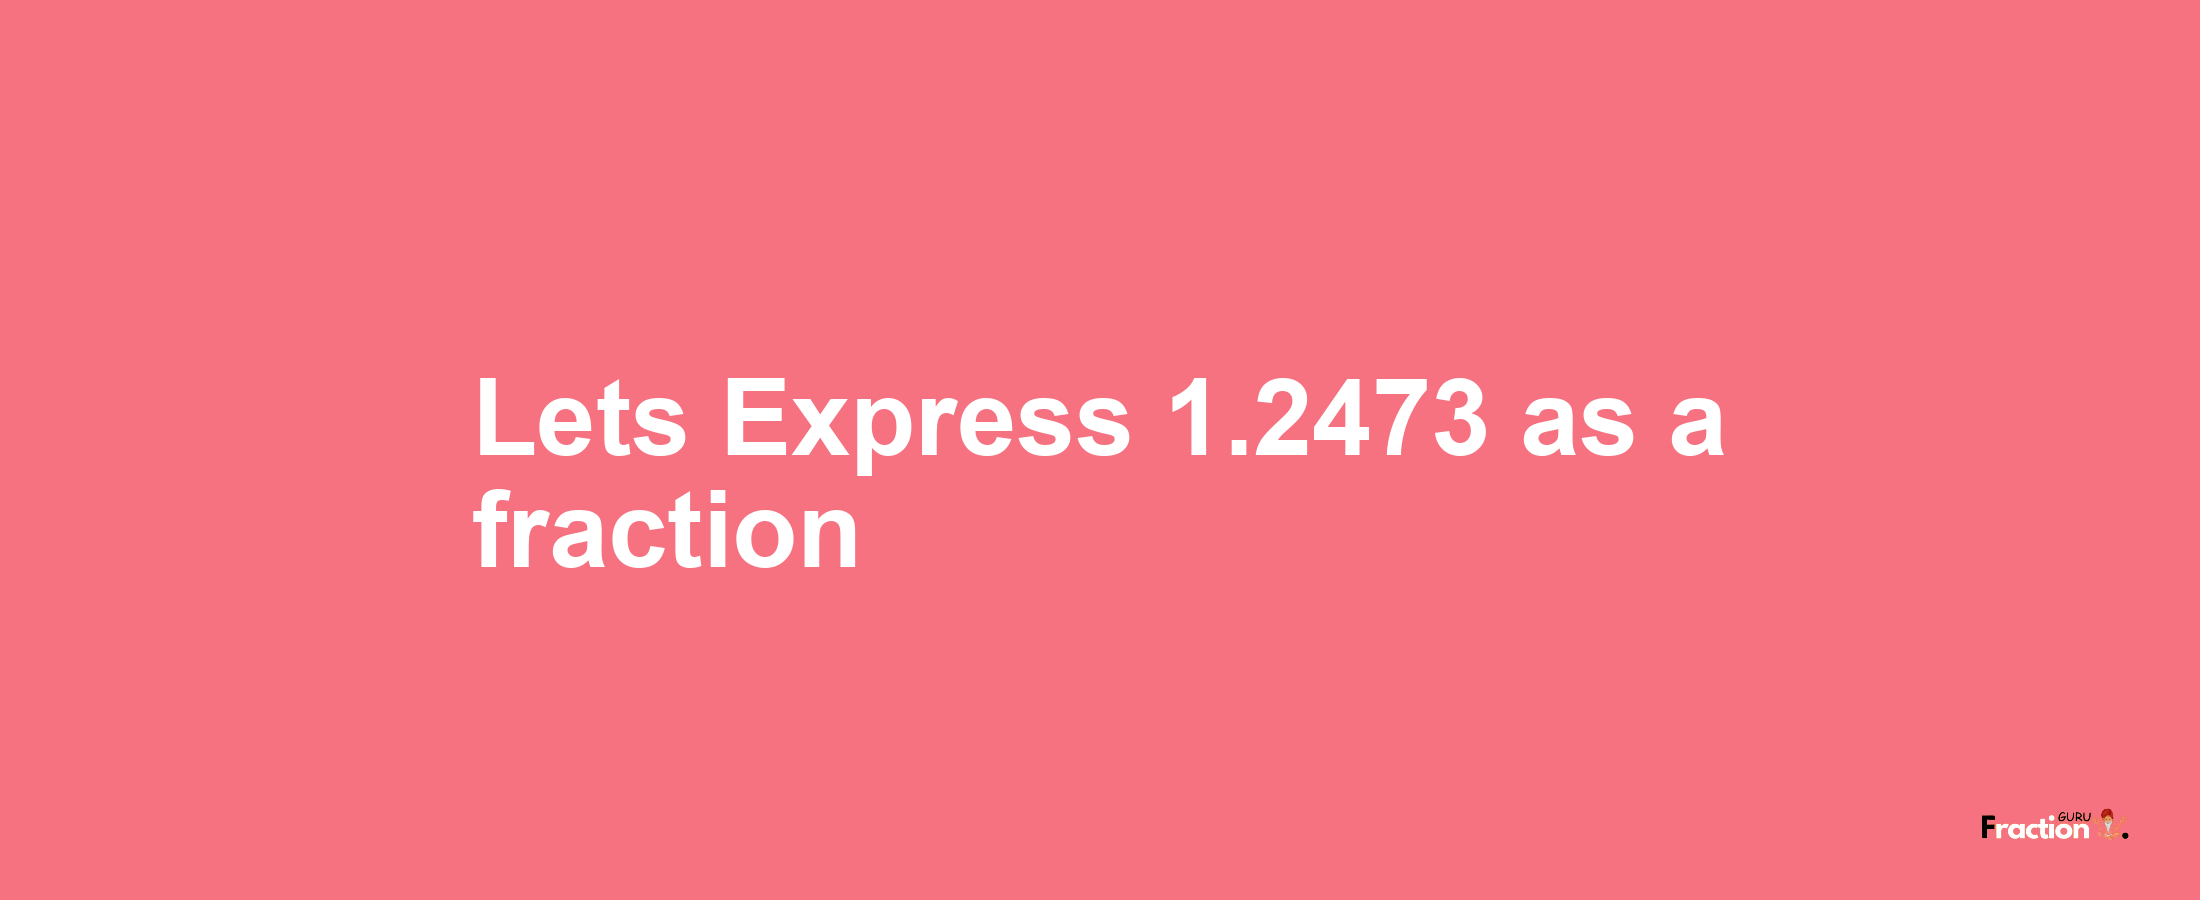 Lets Express 1.2473 as afraction